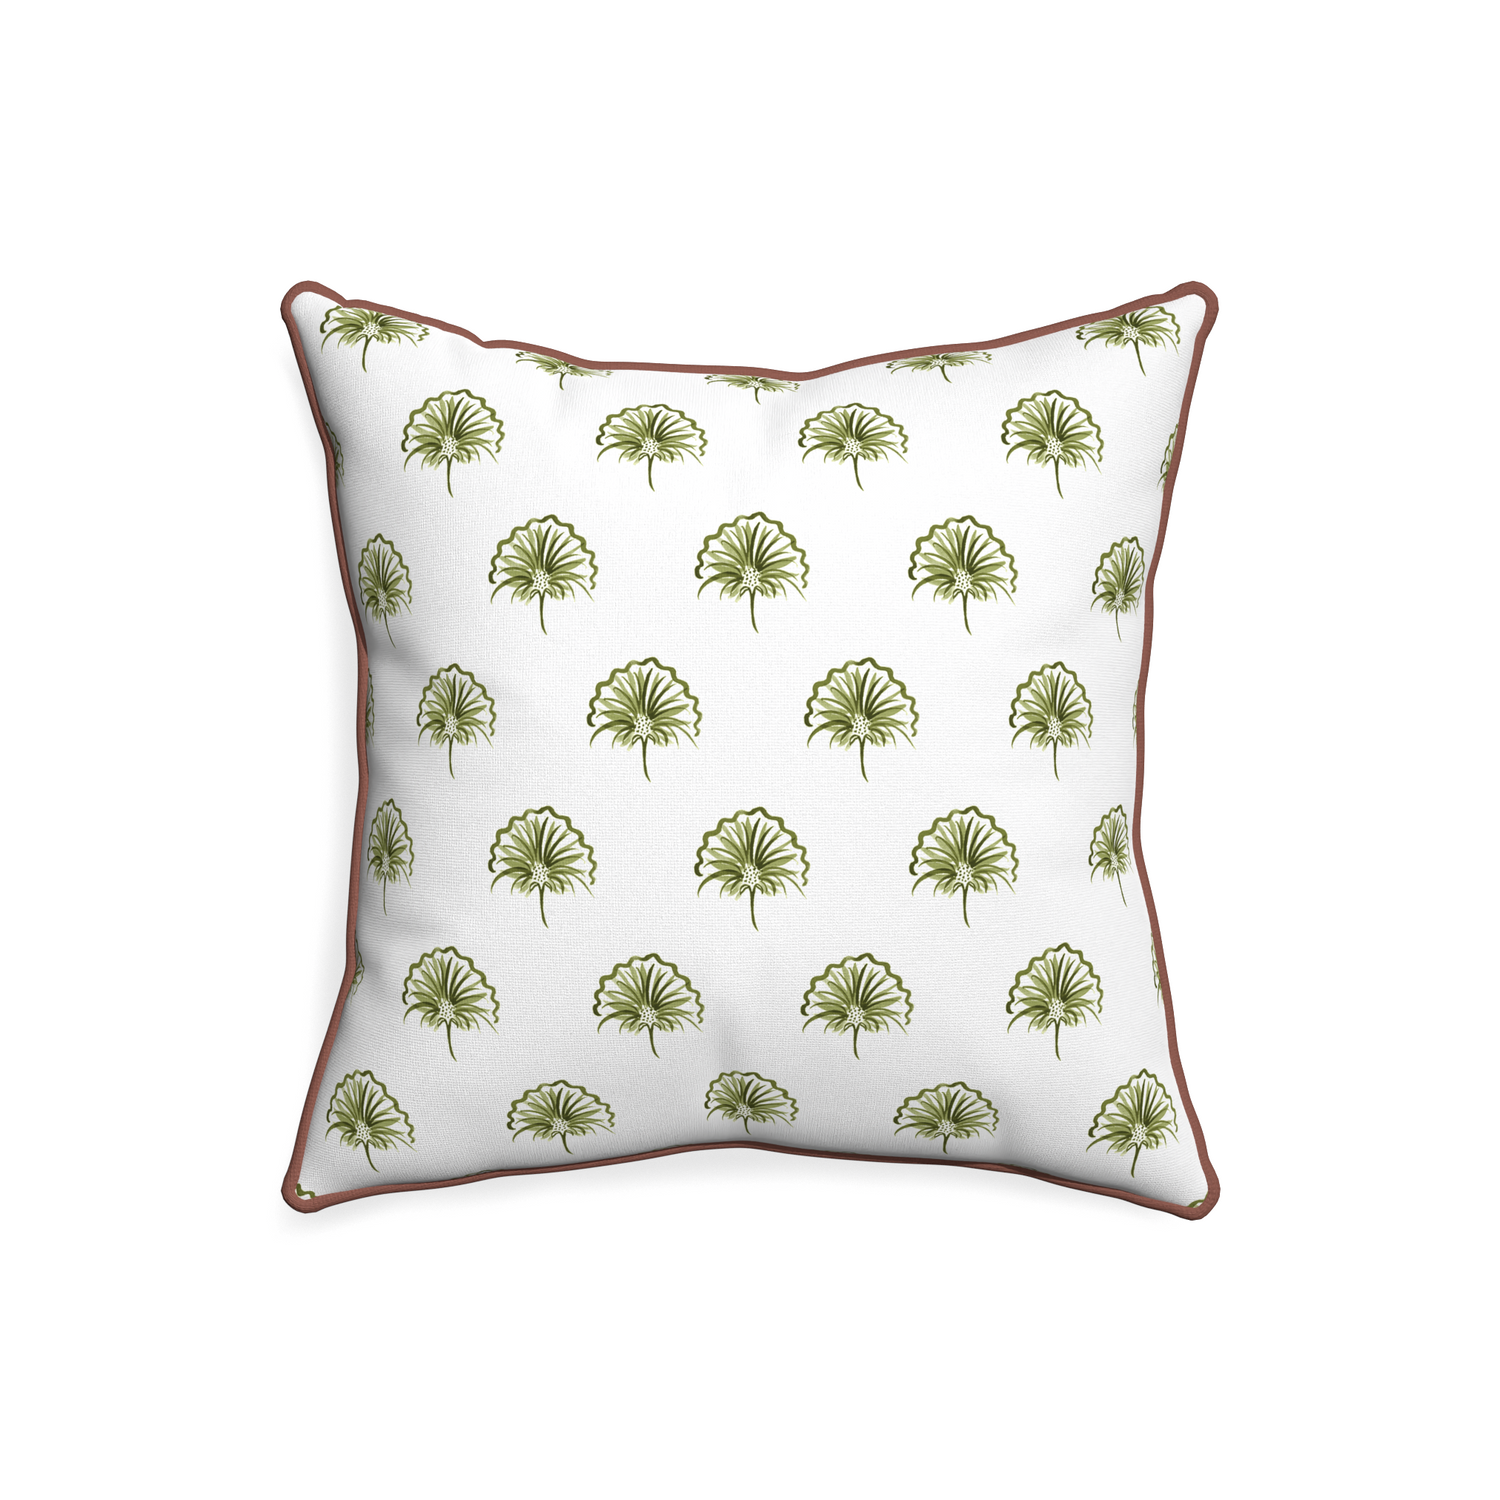 20-square penelope moss custom green floralpillow with w piping on white background